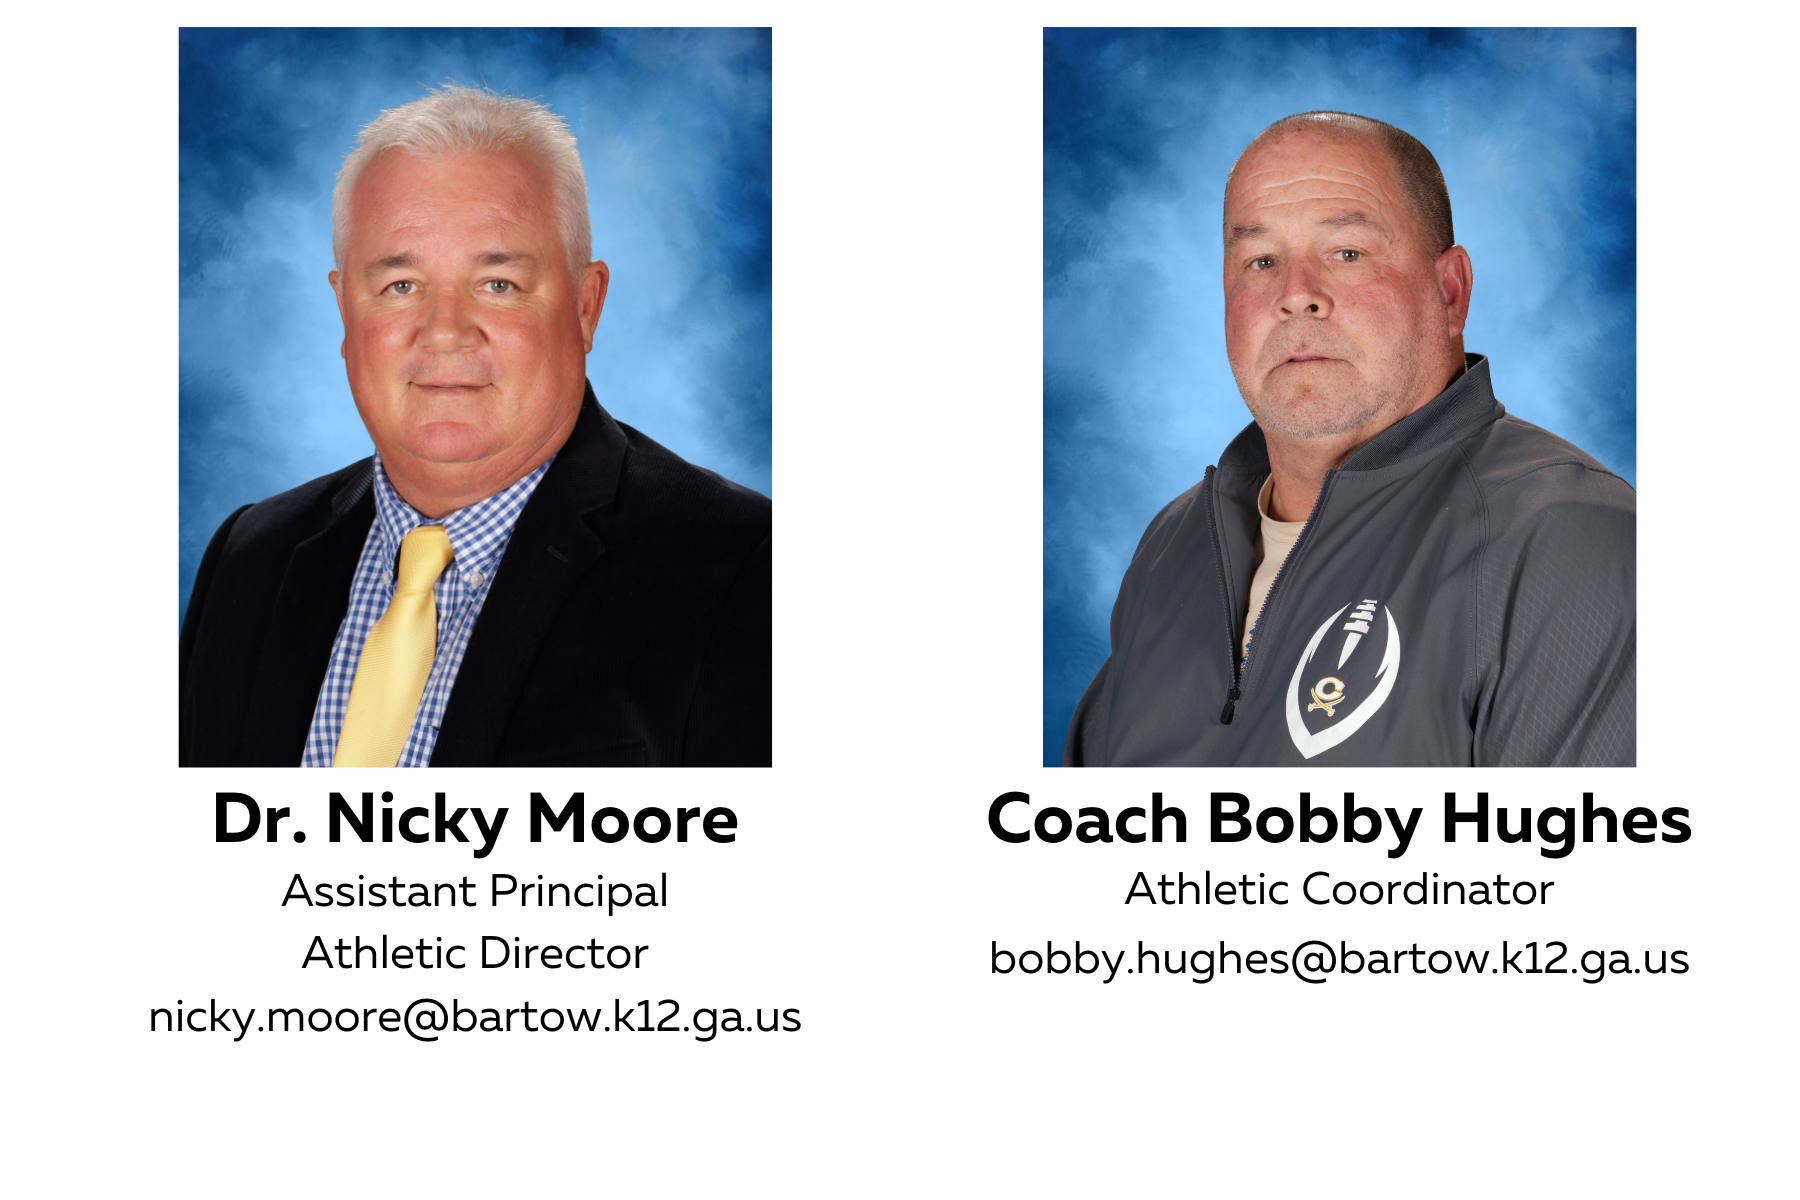 Dr. Nicky Moore, Athletic Director and Coach Bobby Hughes, Athletic Coordinator